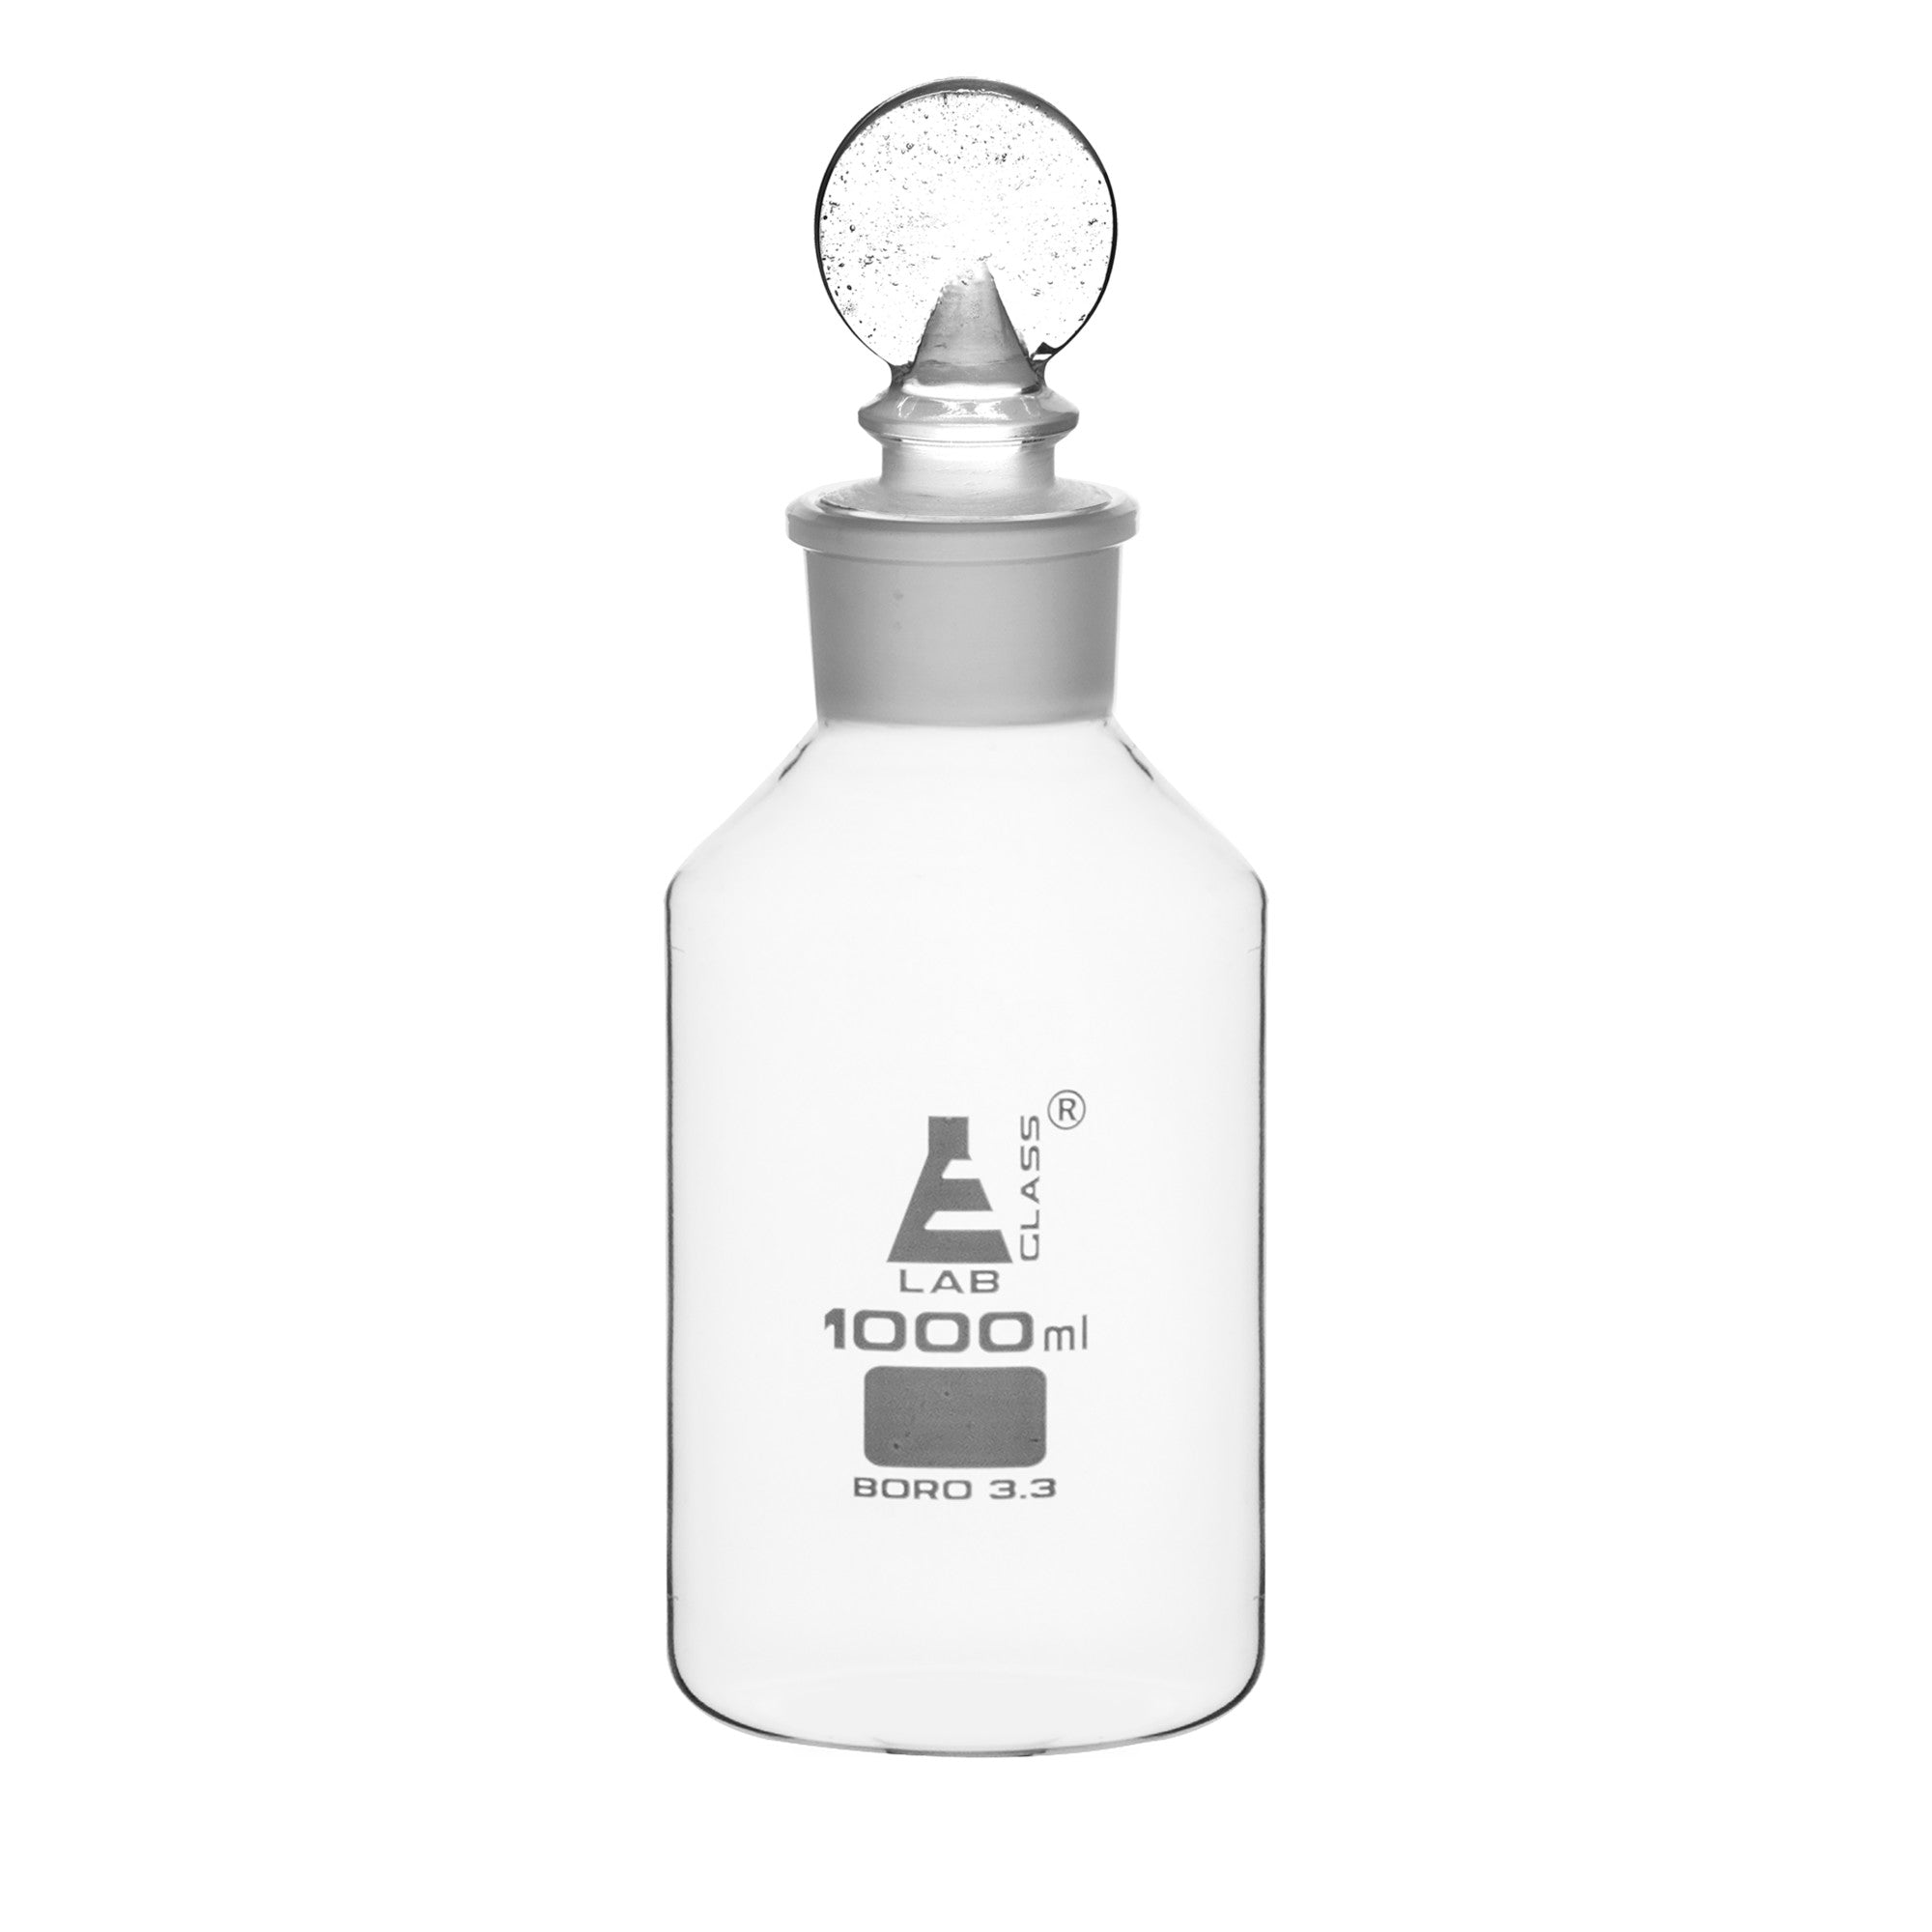 Clear Borosilicate Glass Reagent Bottle with Hollow Glass Stopper, 1000 ml, Wide Mouth, Autoclavable